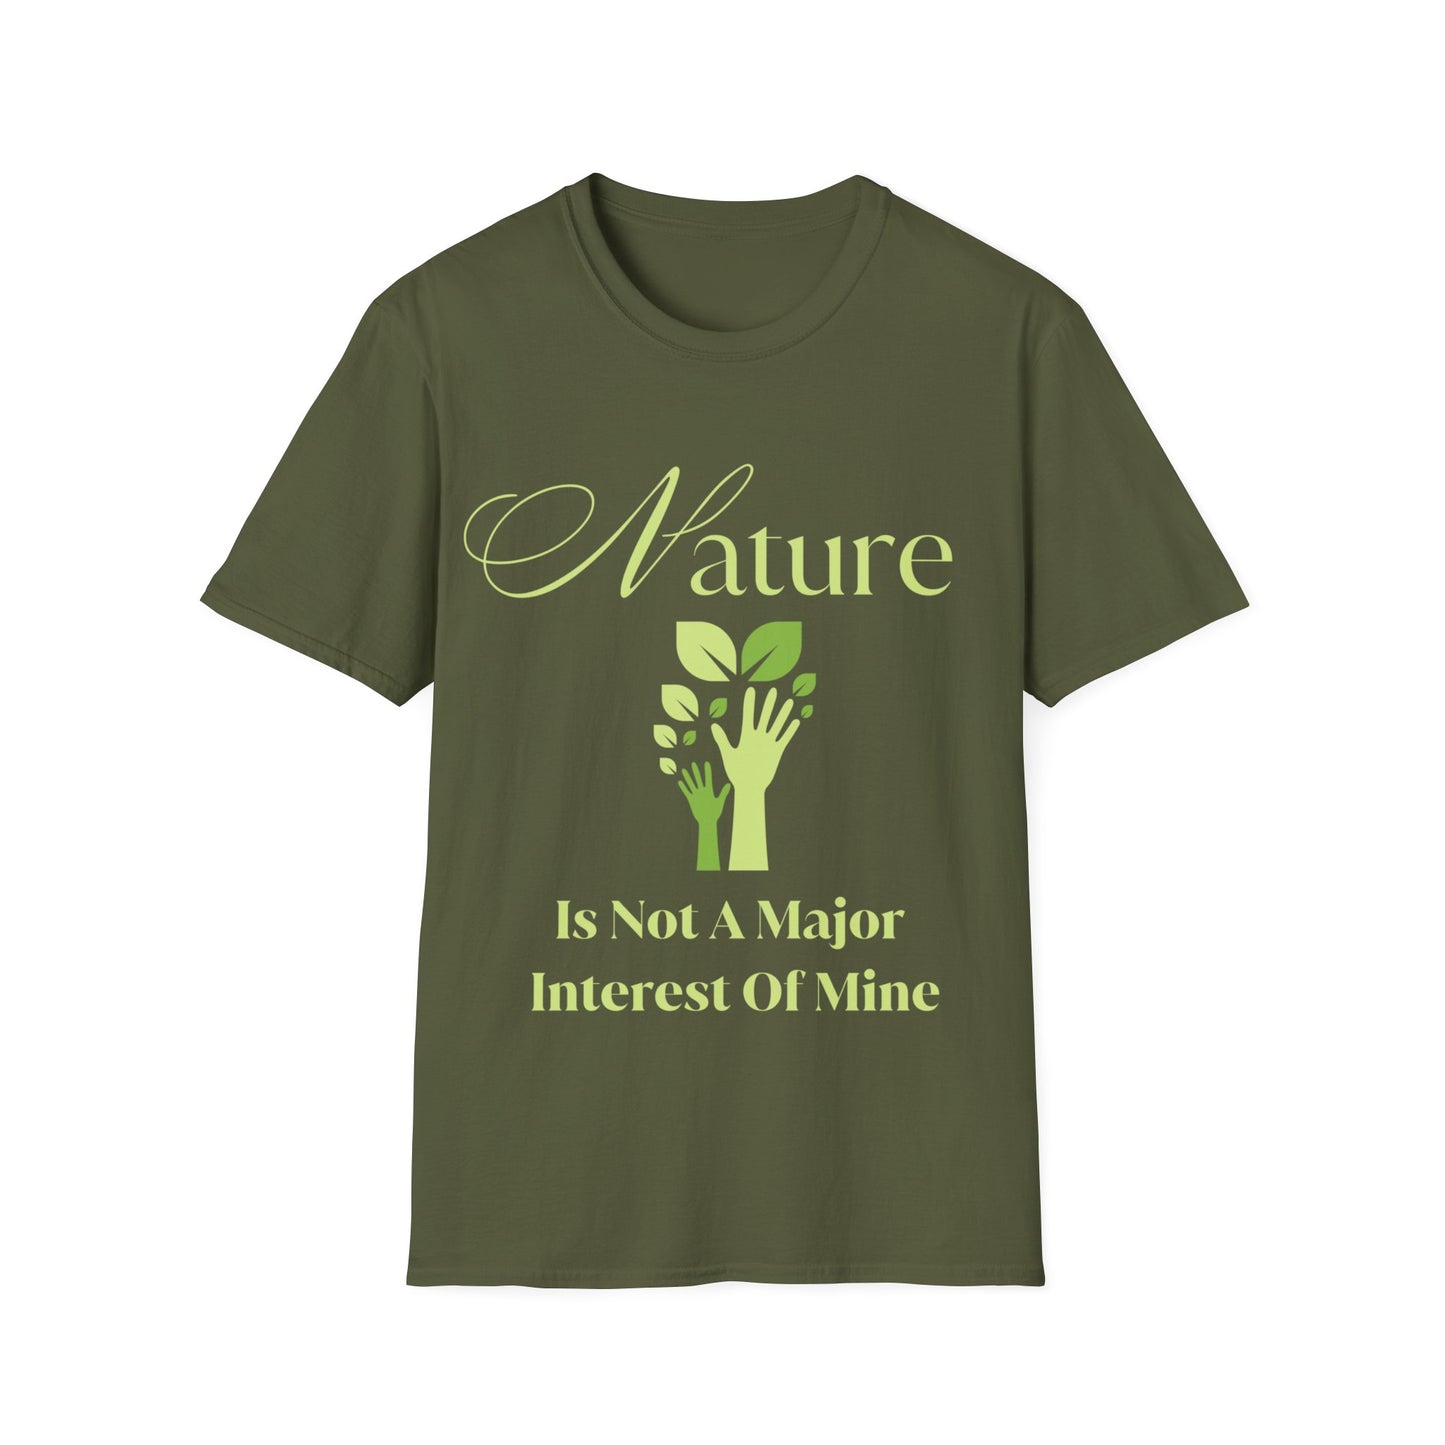 "Nature Is Not A Major Interest Of Mine" Shirt